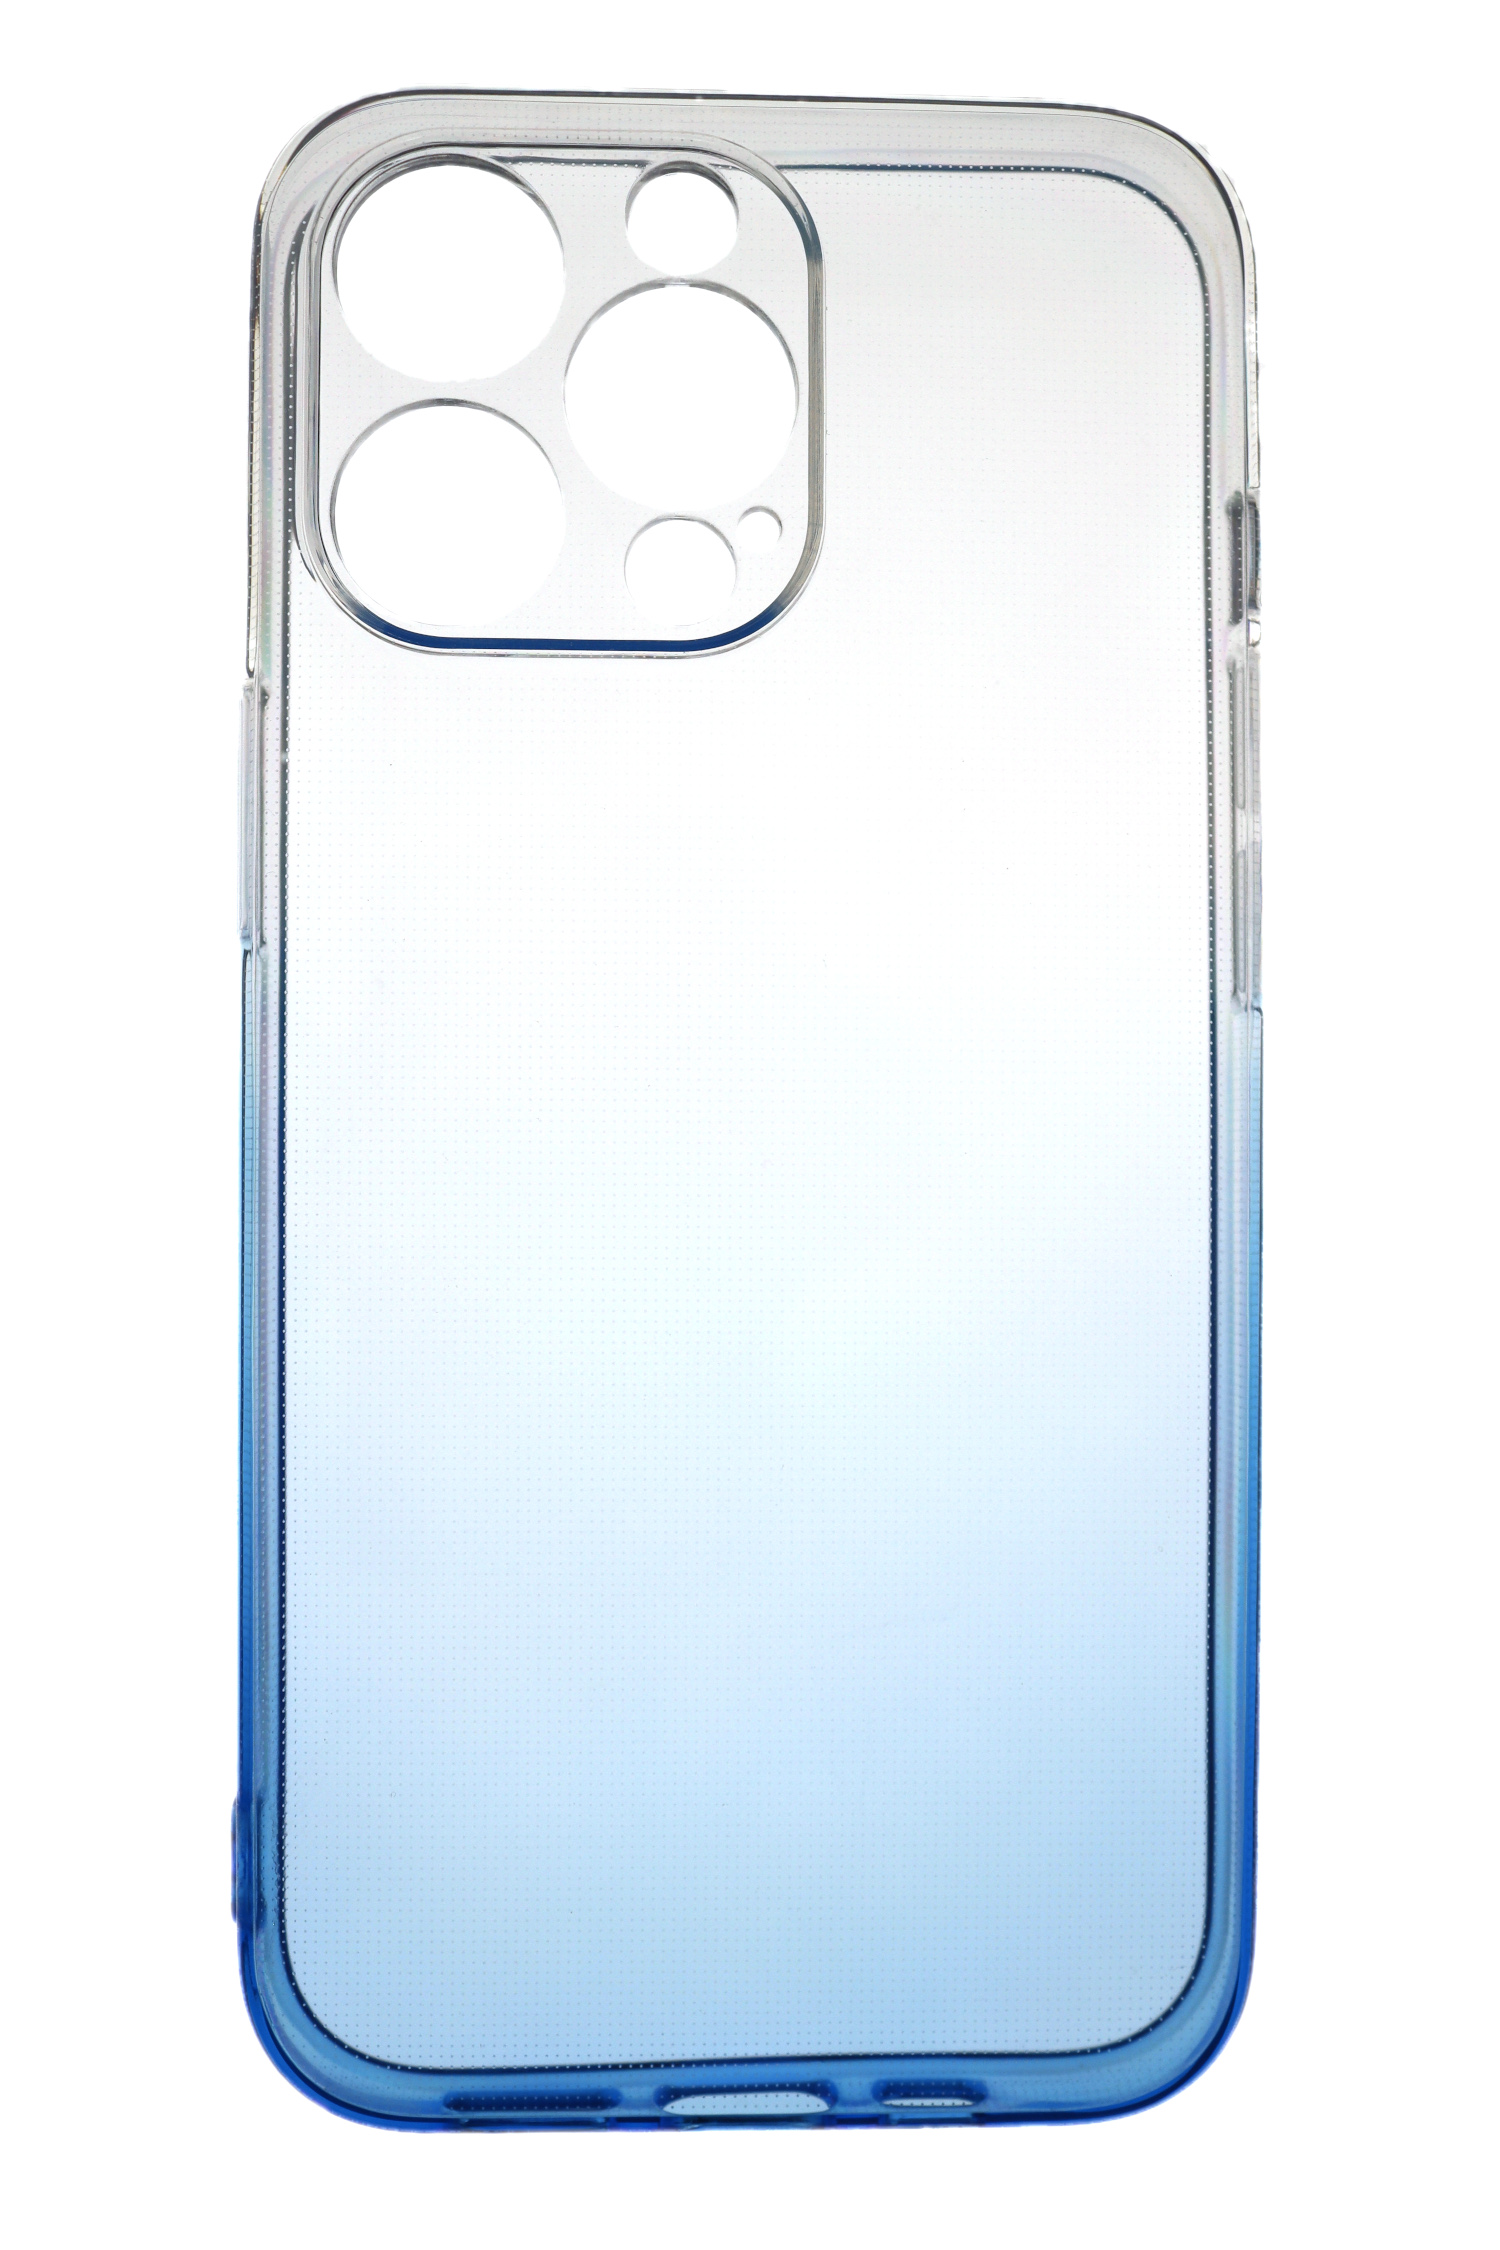 Pro, Case 13 2.0 TPU mm Backcover, Strong, JAMCOVER iPhone Blau, Apple, Transparent